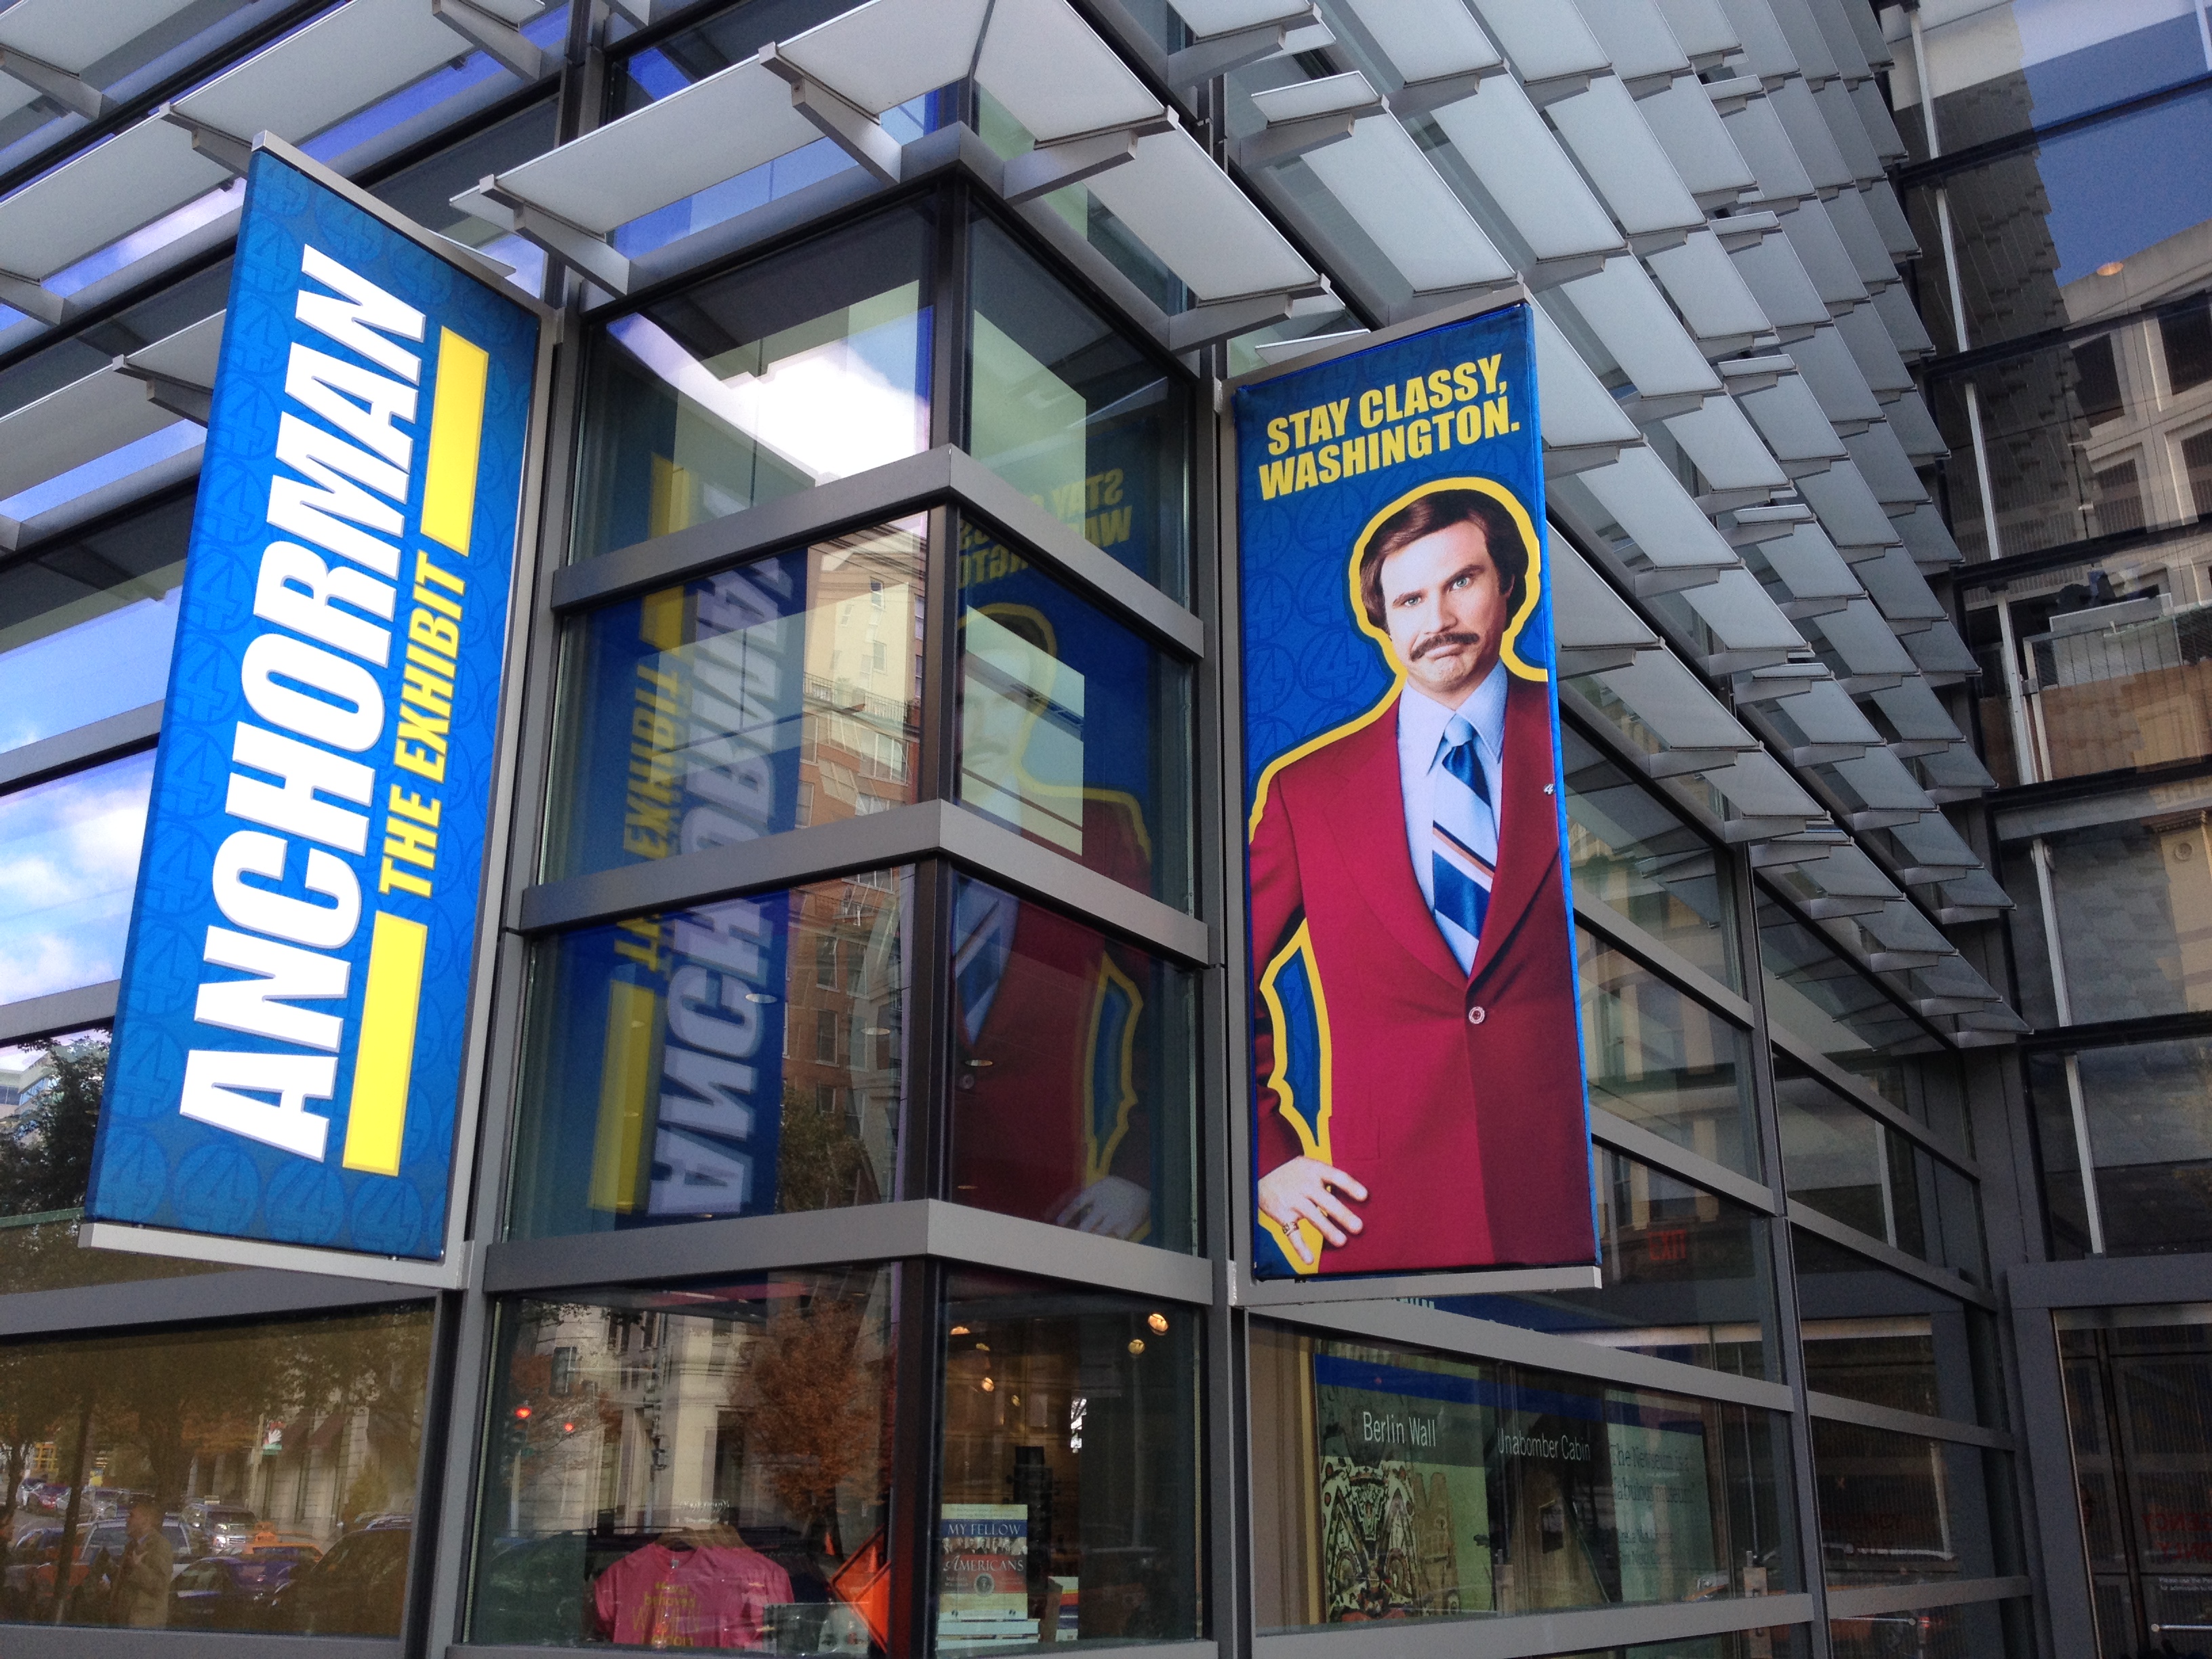 [Vid] Anchorman: The Exhibit Opens at Newseum